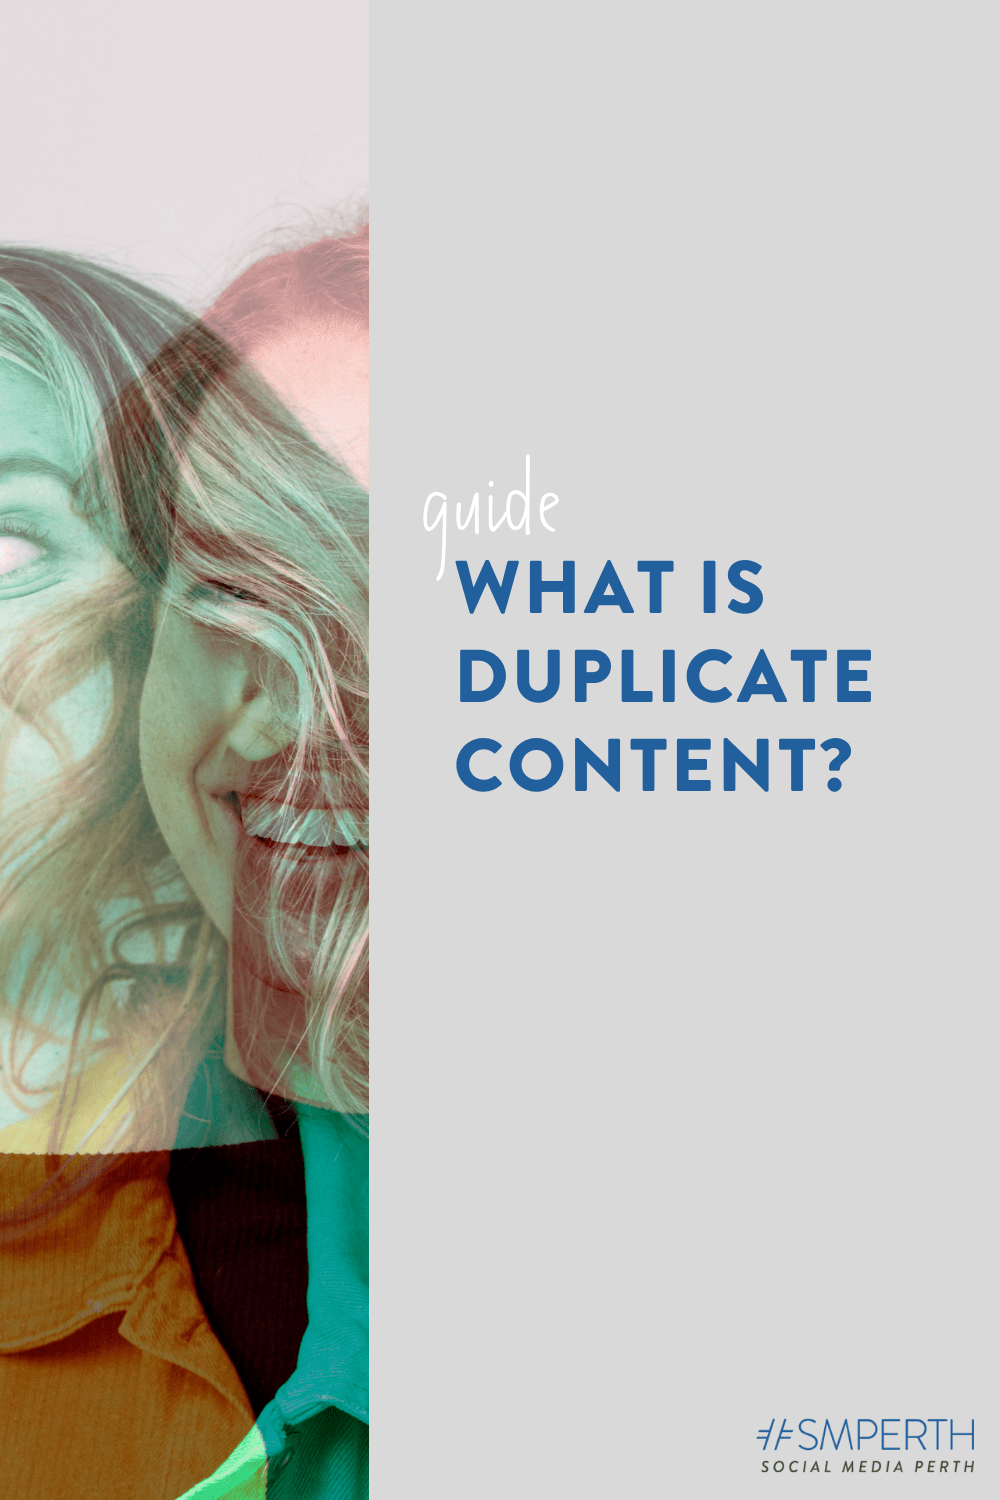 What is duplicate content?